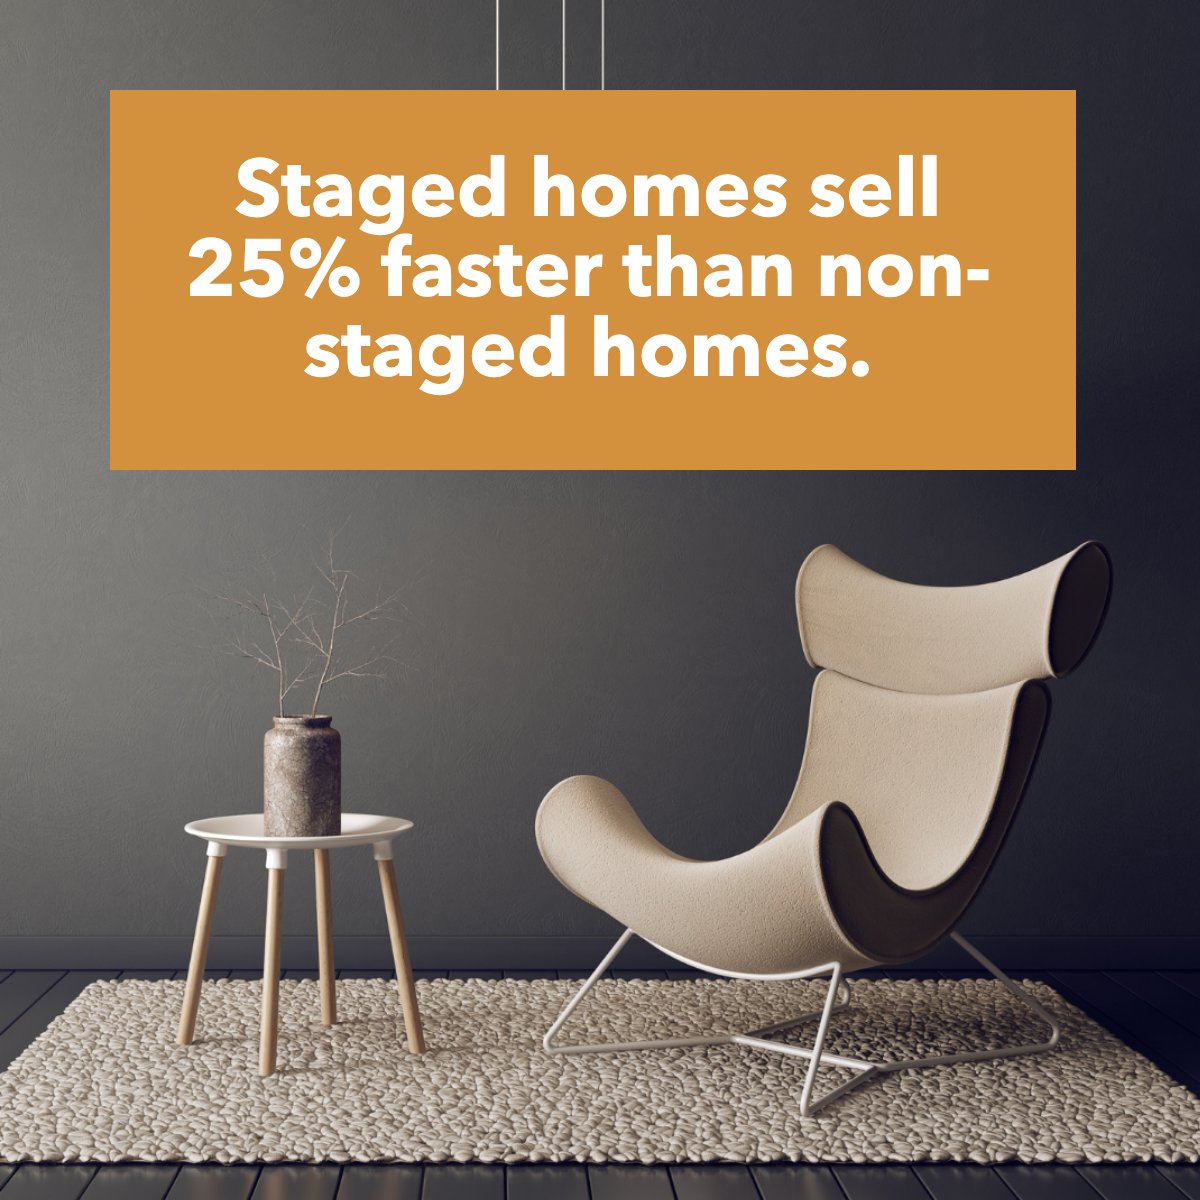 Here is a great tip if you are trying to sell your home! 🏡

#homeselling #stagedhomes #realestatefacts #realestate
 #callniecie